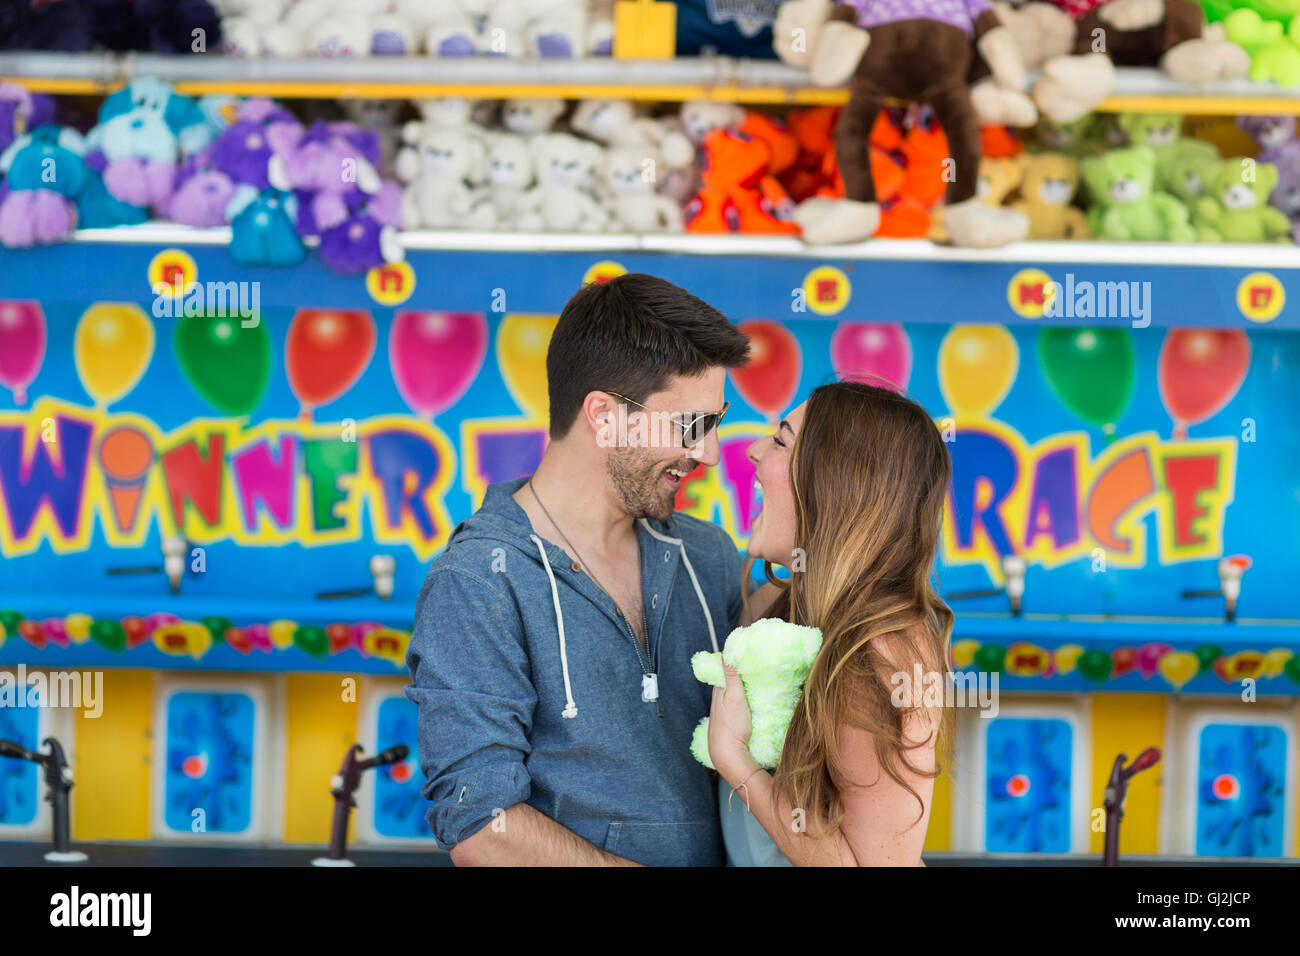 Couple in front of fairground shooting gallery face to face smiling, Coney island, Brooklyn, New York, USA Stock Photo